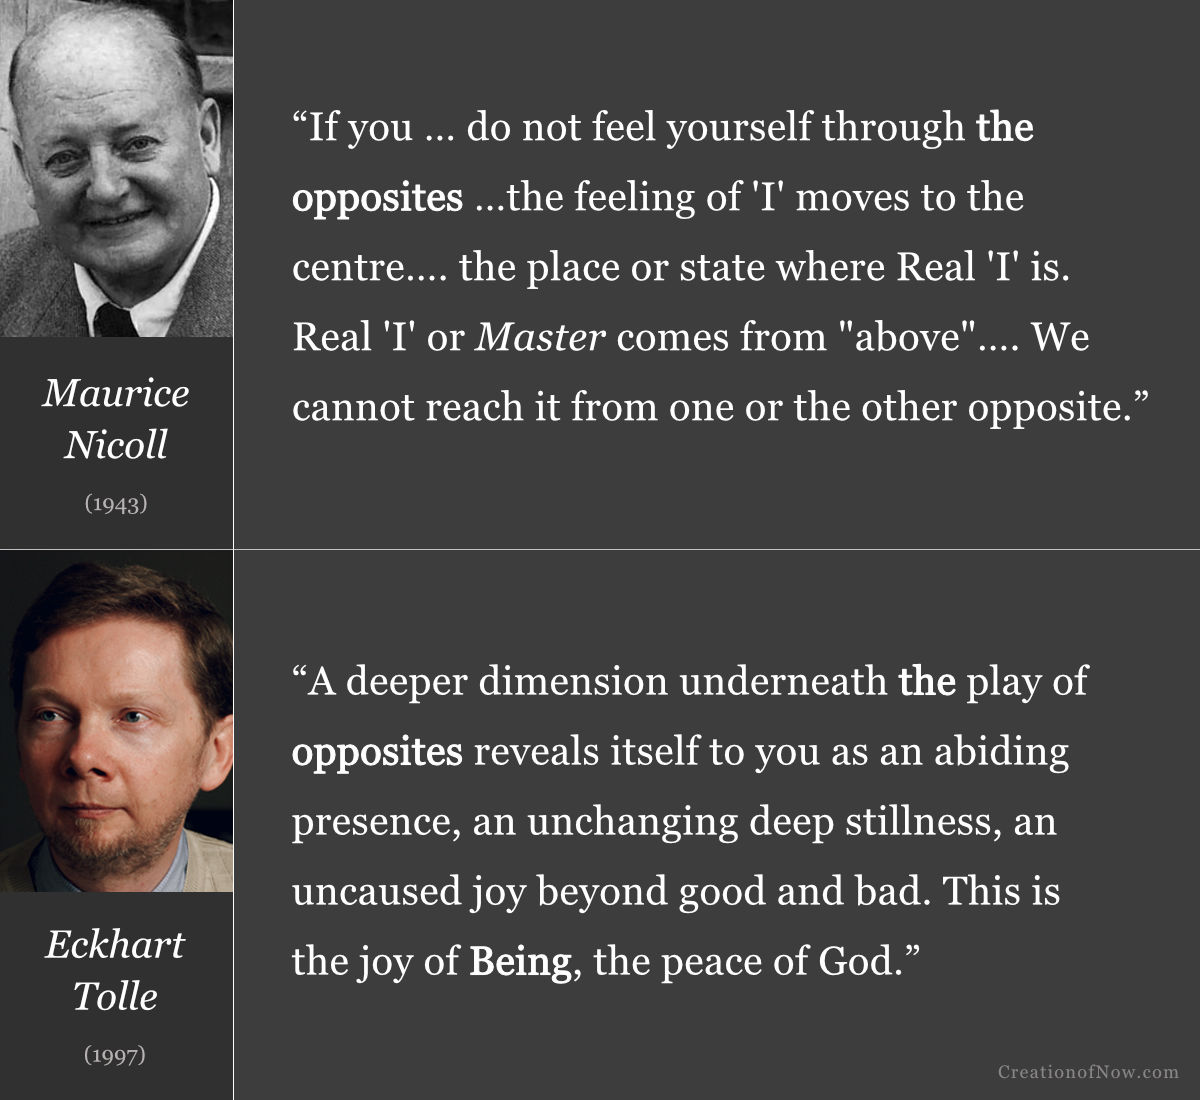 Maurice Nicoll and Eckhart Tolle quotes about how the real sense of self and being does not come from the opposites